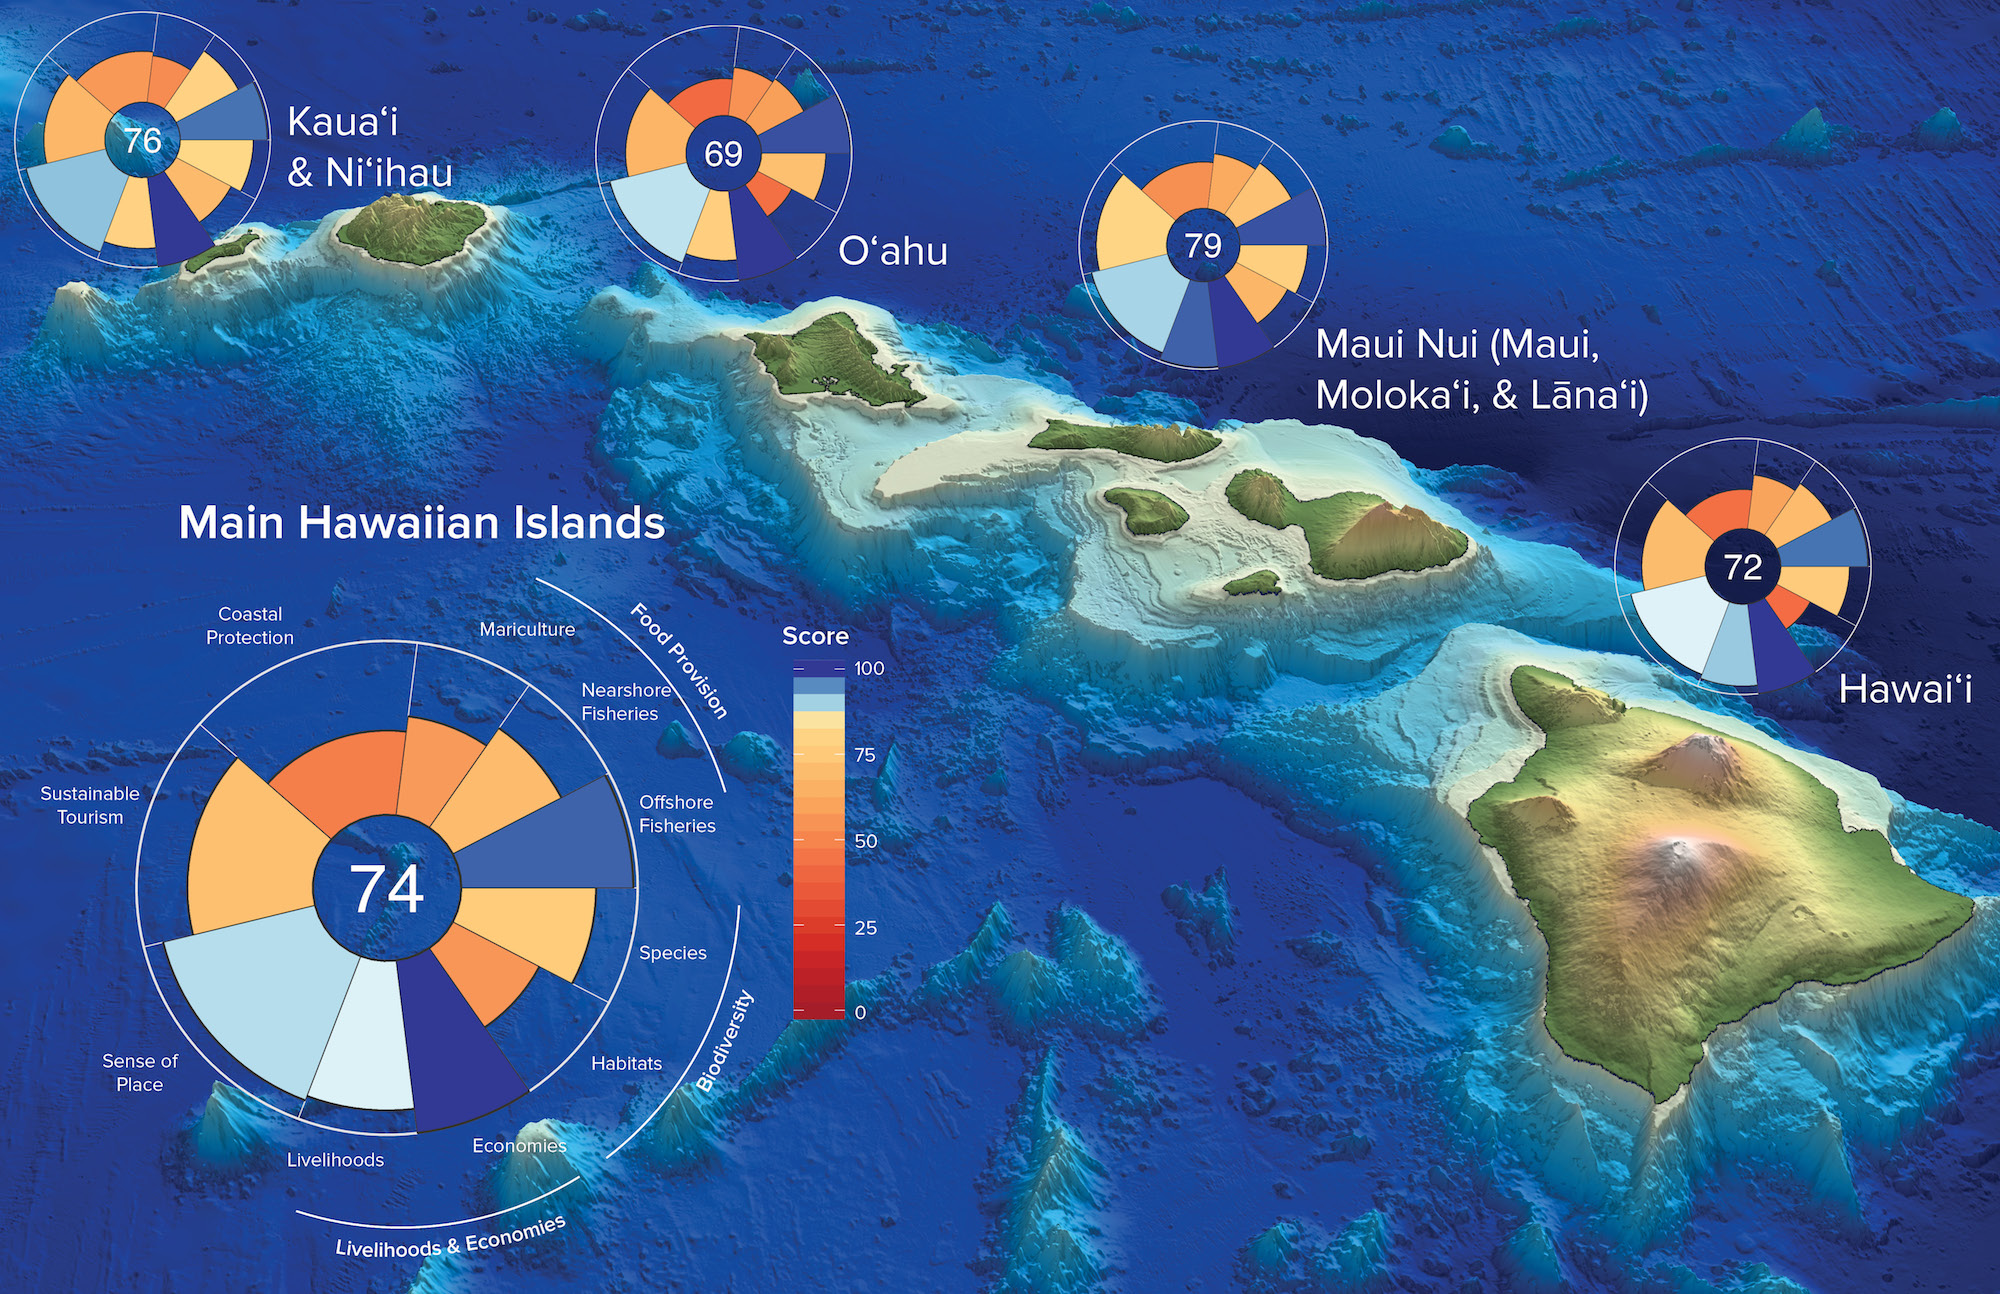 The Ocean Health Index scores for Hawaii's main islands.